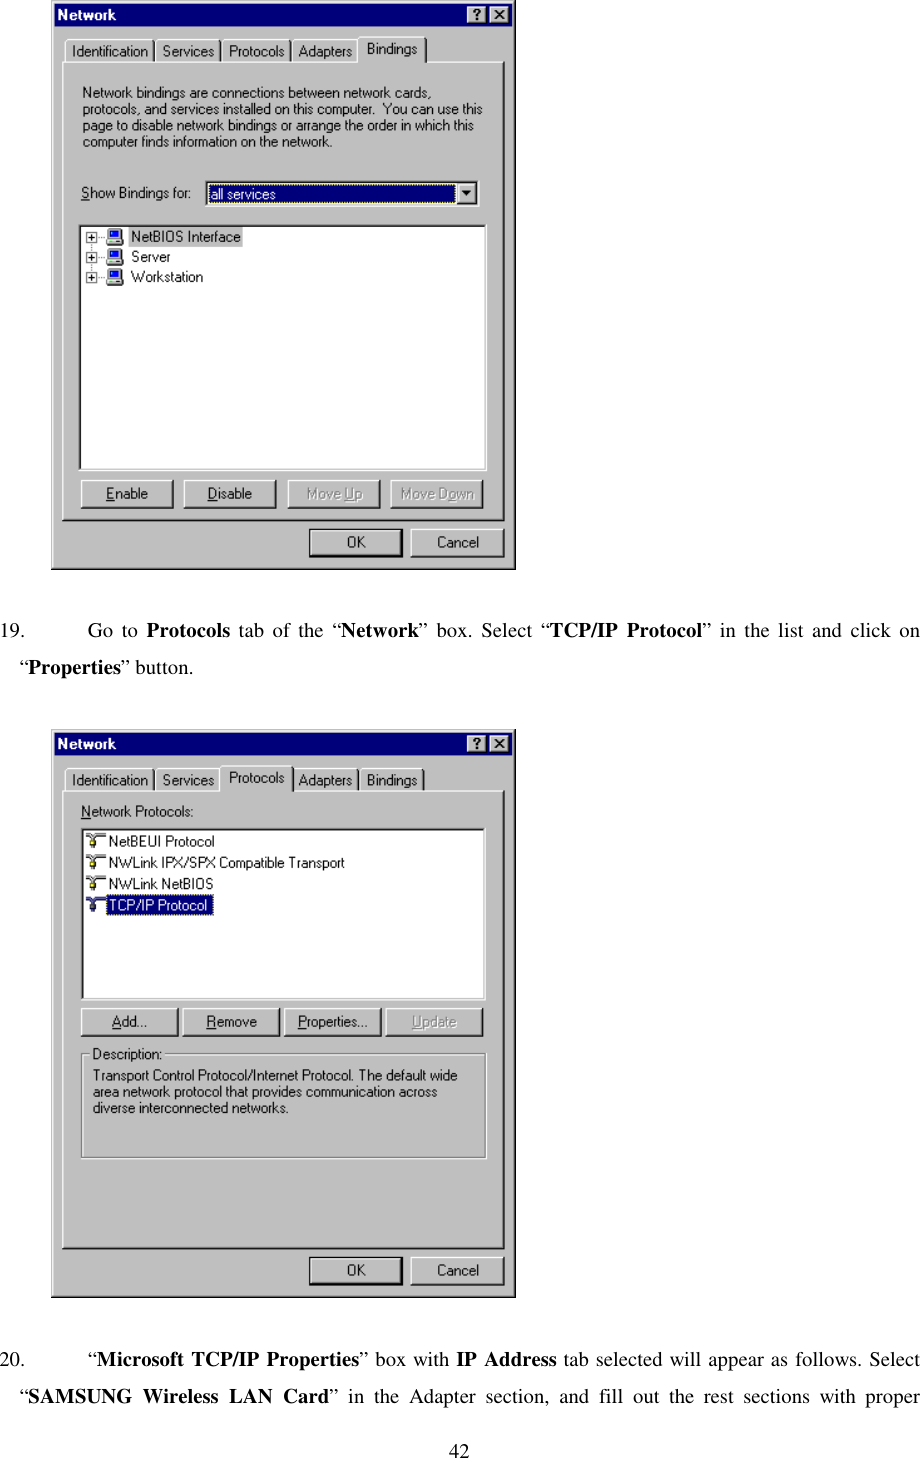   42              19. Go to Protocols tab of the “Network” box. Select “TCP/IP Protocol” in the list and click on “Properties” button.                20. “Microsoft TCP/IP Properties” box with IP Address tab selected will appear as follows. Select “SAMSUNG Wireless LAN Card” in the Adapter section, and fill out the rest sections with proper 